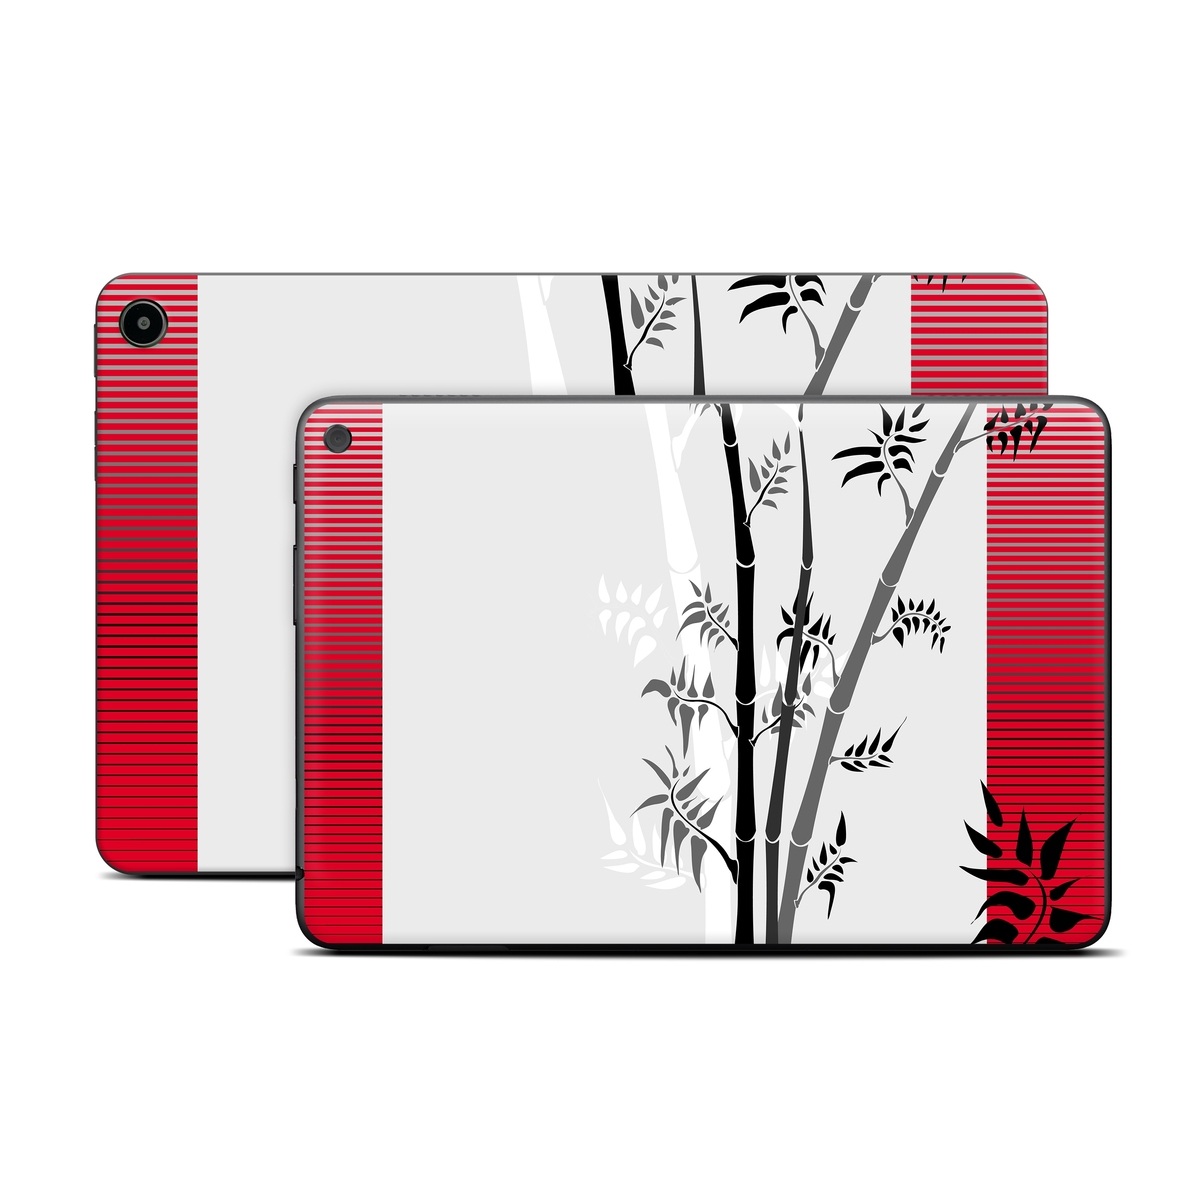 Amazon Fire Tablet Series Skin Skin design of Botany, Plant, Branch, Plant stem, Tree, Bamboo, Pedicel, Black-and-white, Flower, Twig, with gray, red, black, white colors